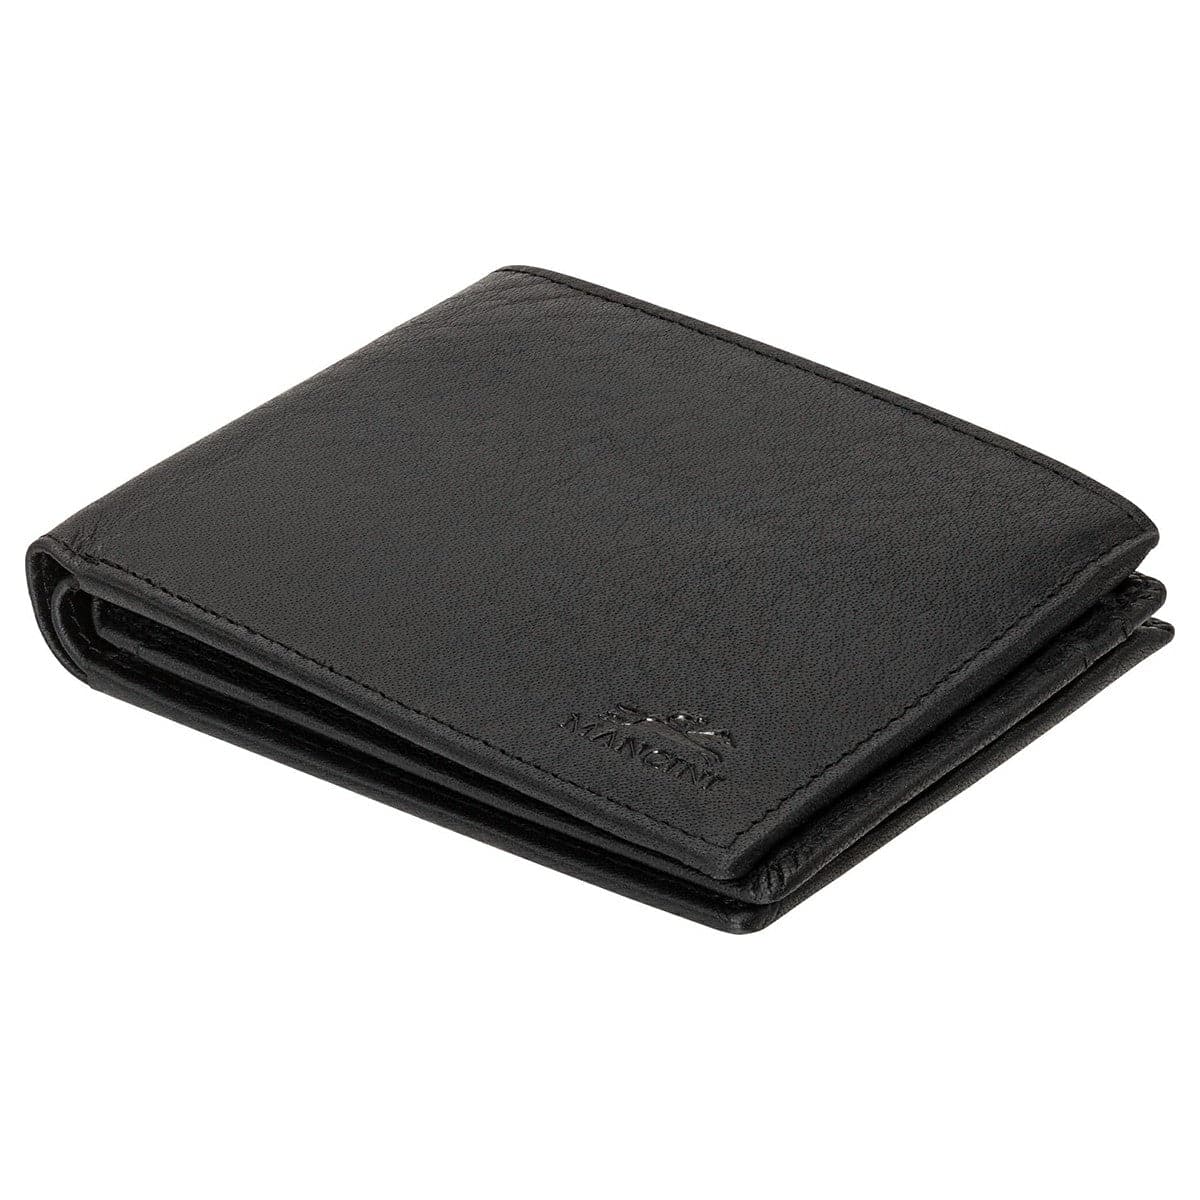 Mancini Buffalo RFID Secure Center Wing Wallet with Coin Pocket